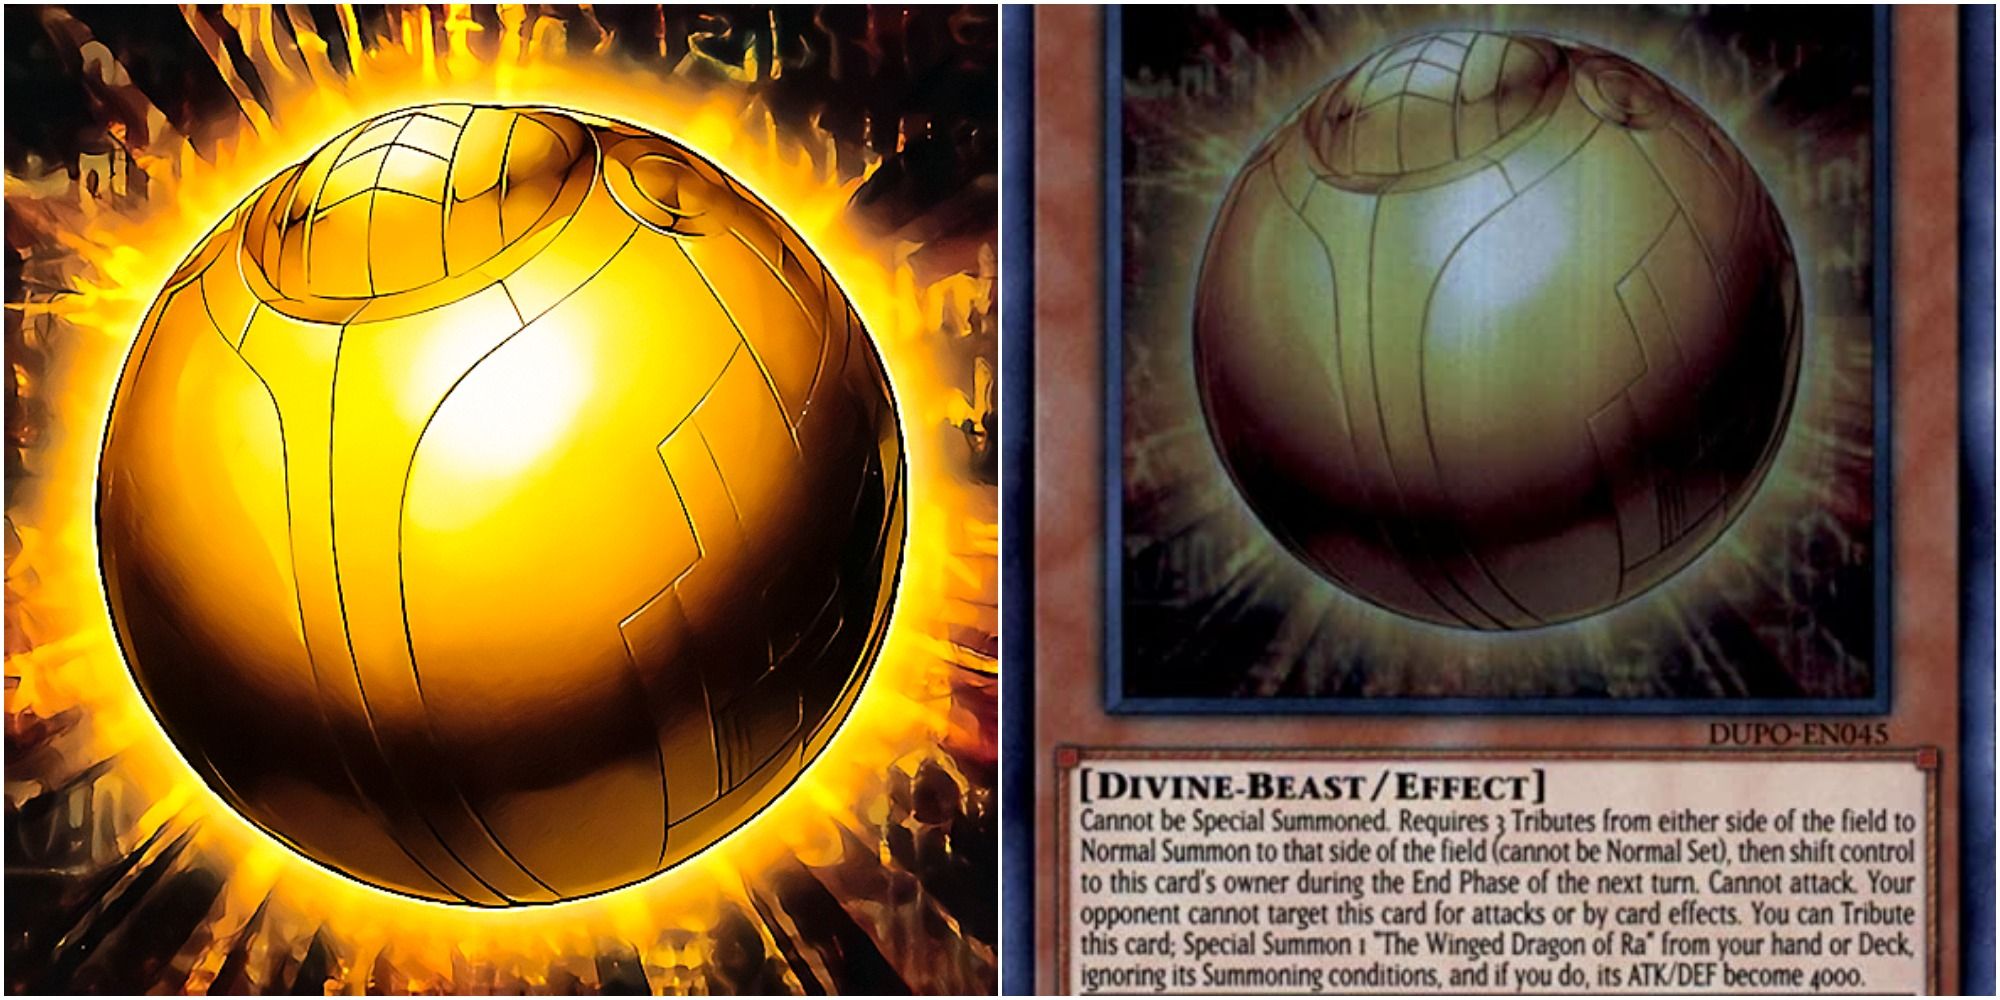 the winged dragon of ra - sphere mode card art and text